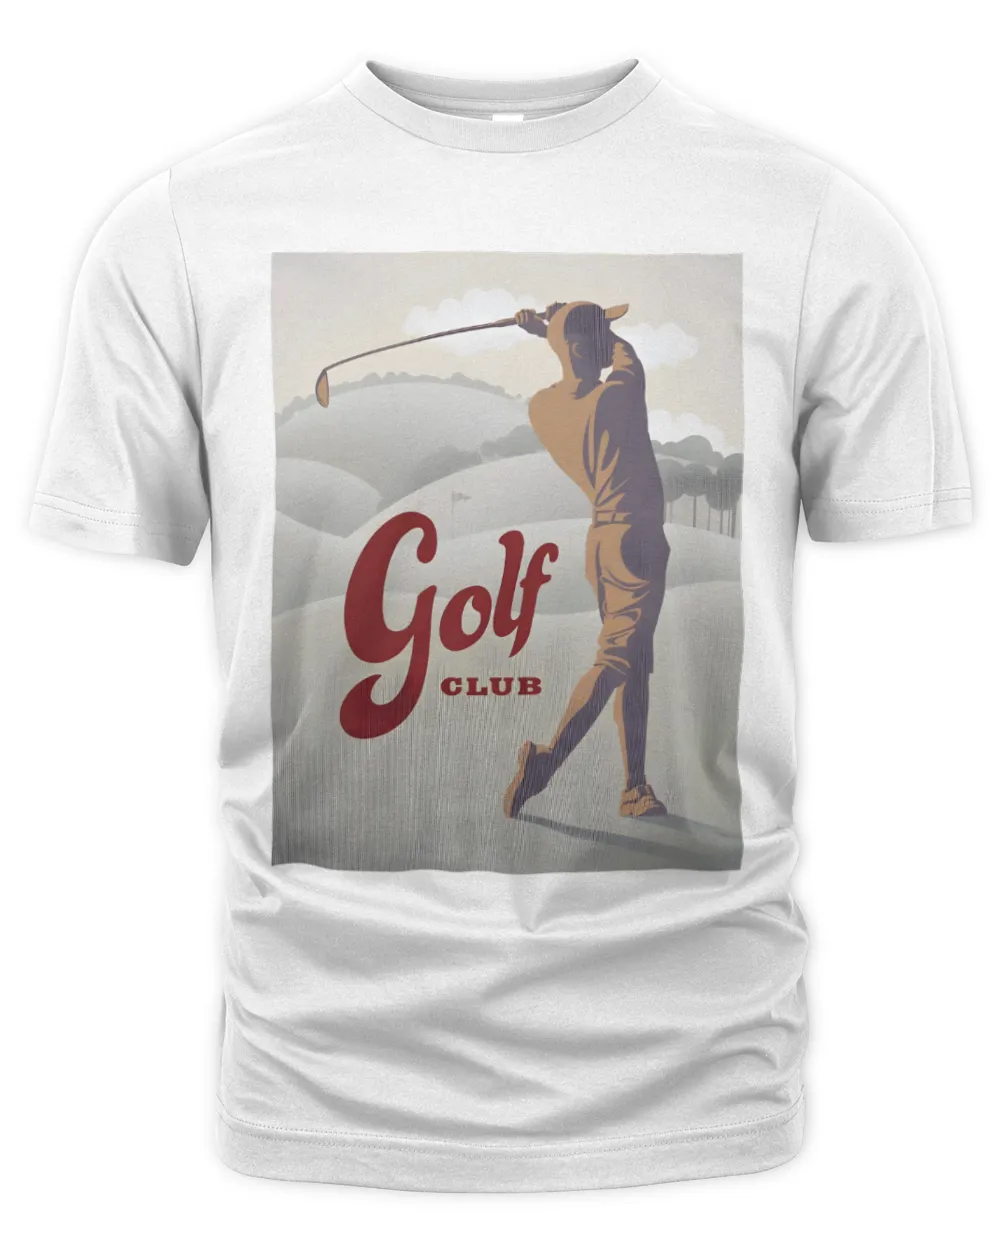 Golf T-Shirt, Masters Hoodie, Golf Player Sweater, Augusta Shirt, PGA Tee, Golf Gift, Golfer Clothes, Major Championship Top, Funny Golf Top